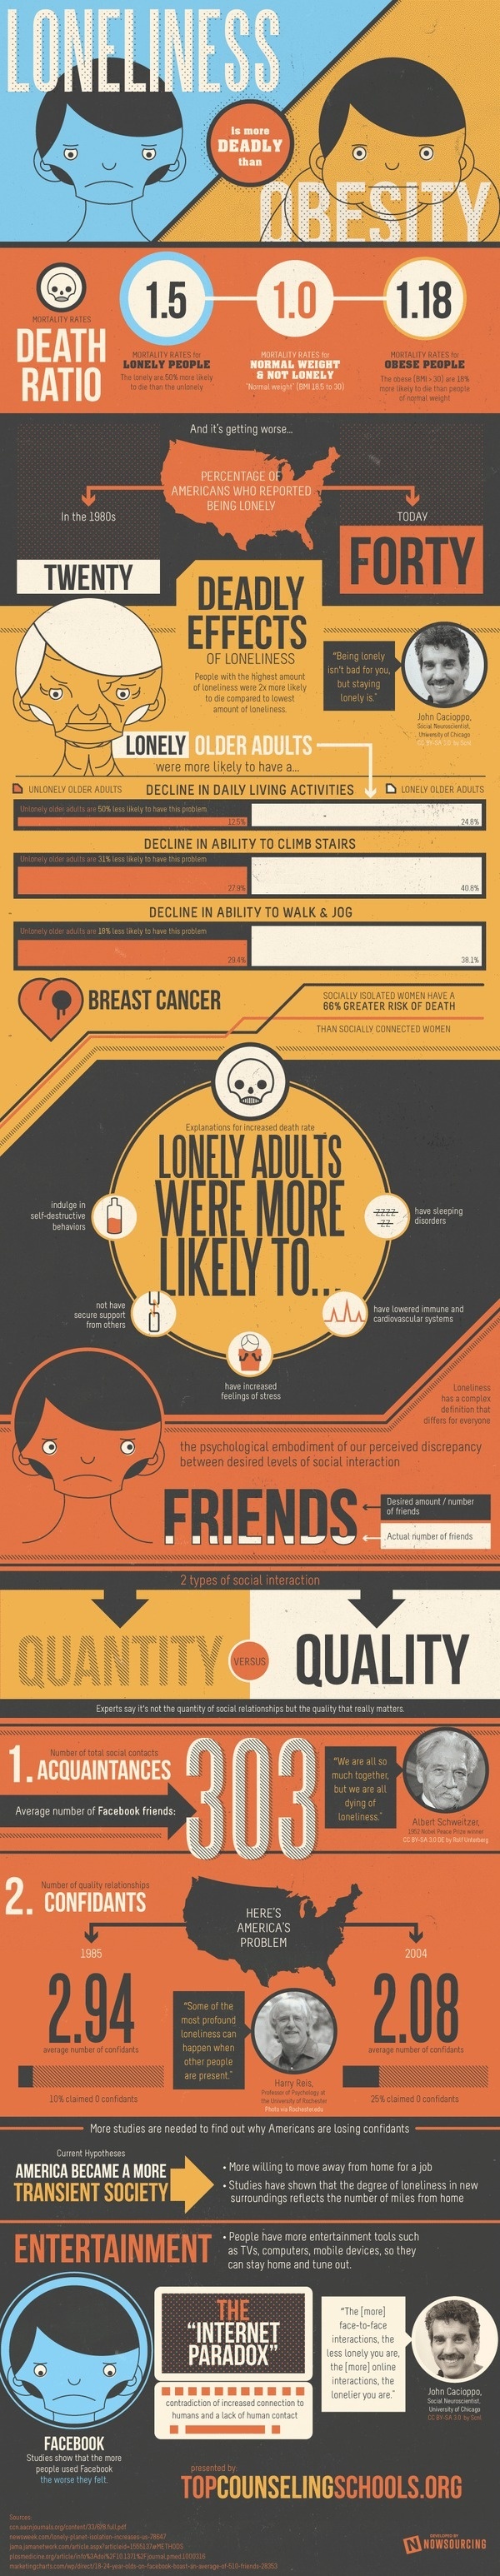 Deadly Effects of Loneliness #infographic